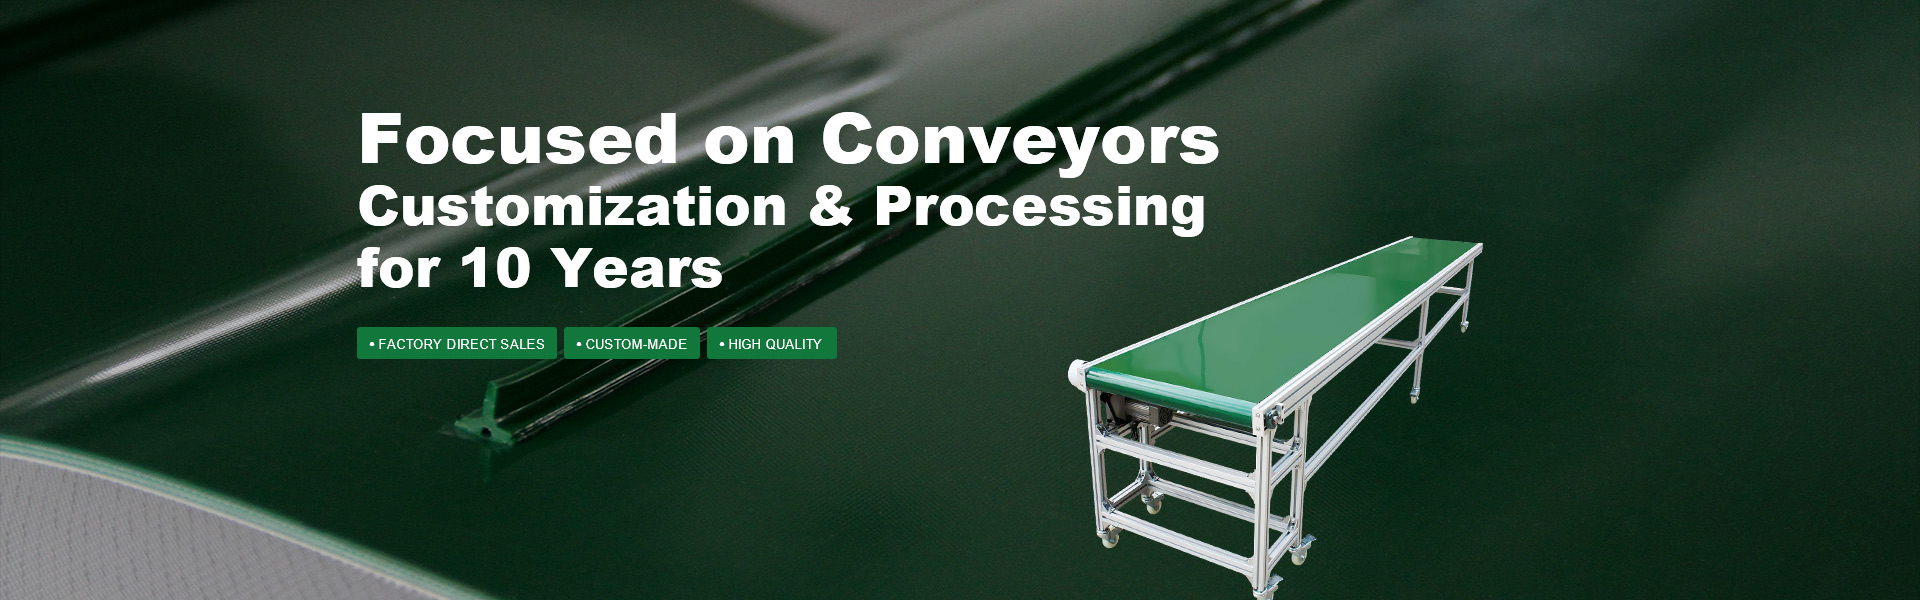 Focused on Conveyors Customization&Processing for 10 Years